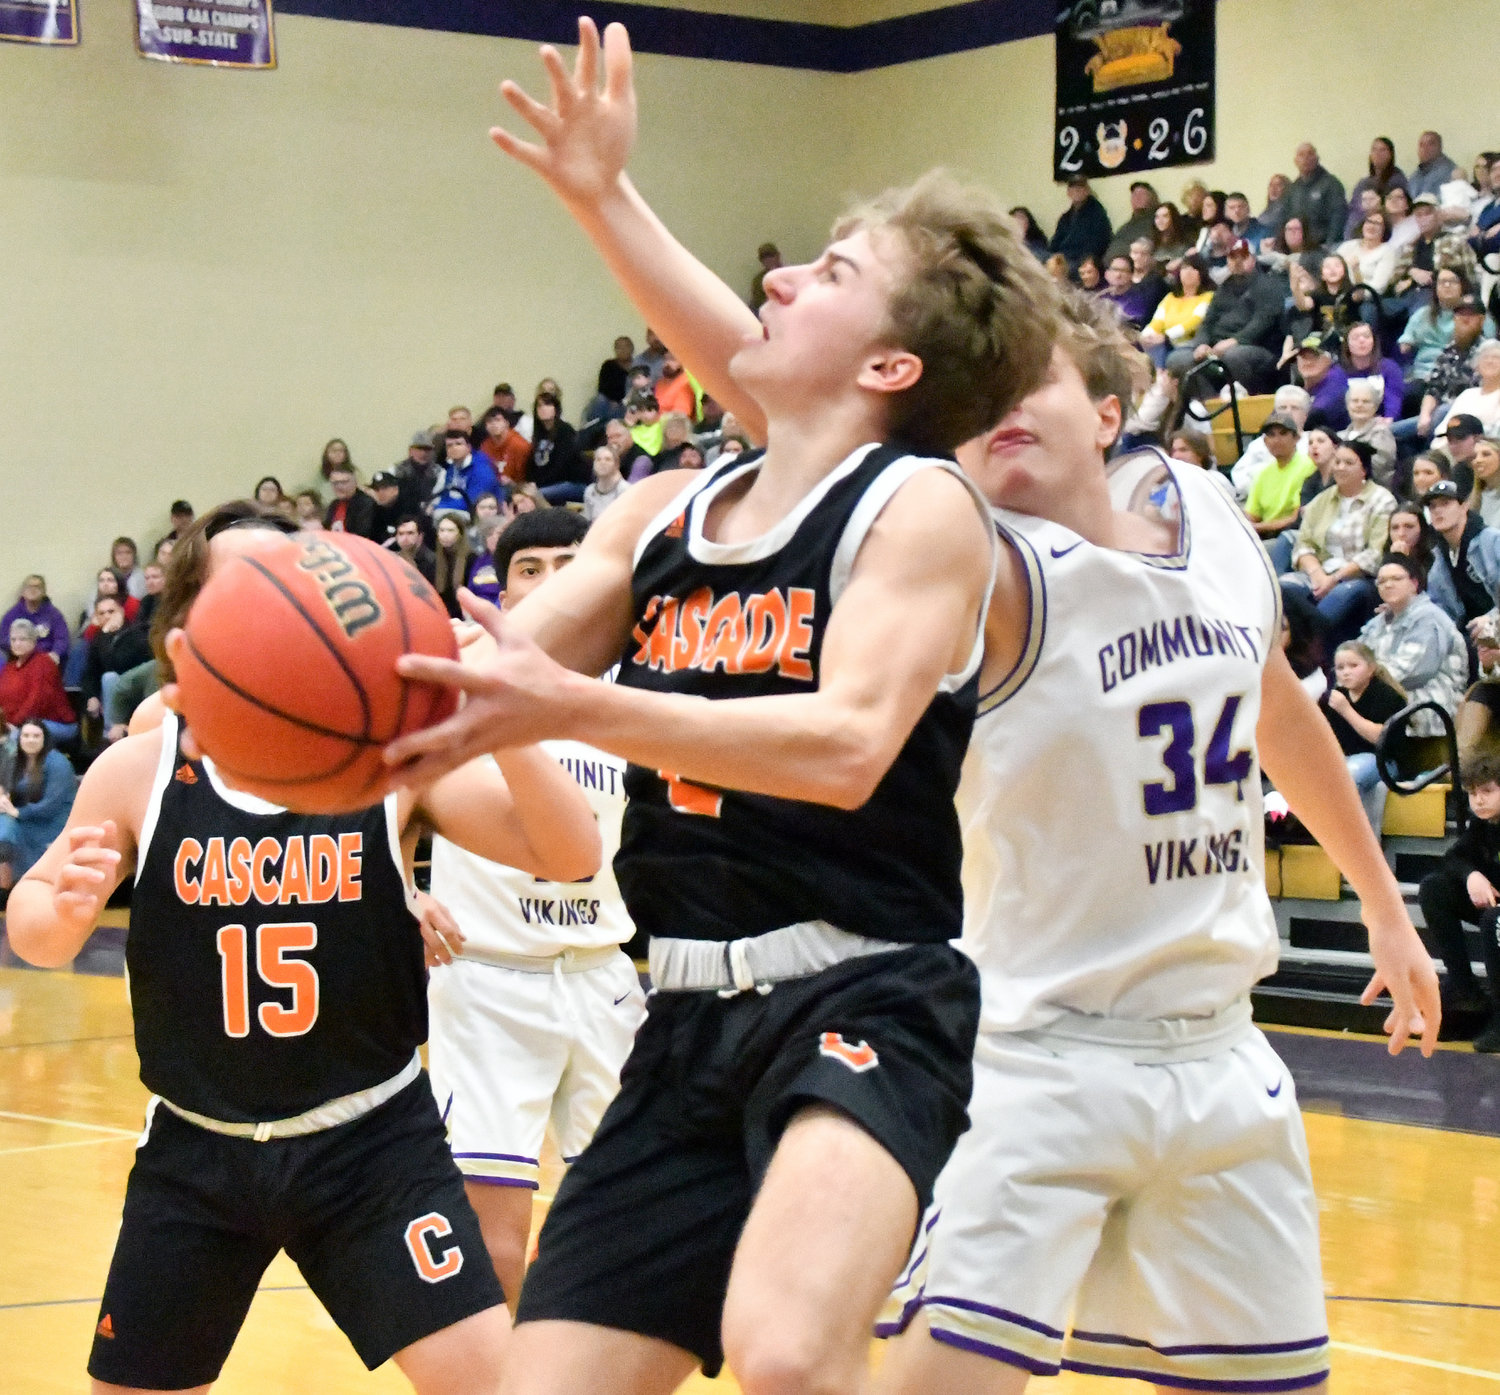 Jayden Gulick drives to the basket for the Champions. Gulick had four treys and 21 points in the Cascade win.